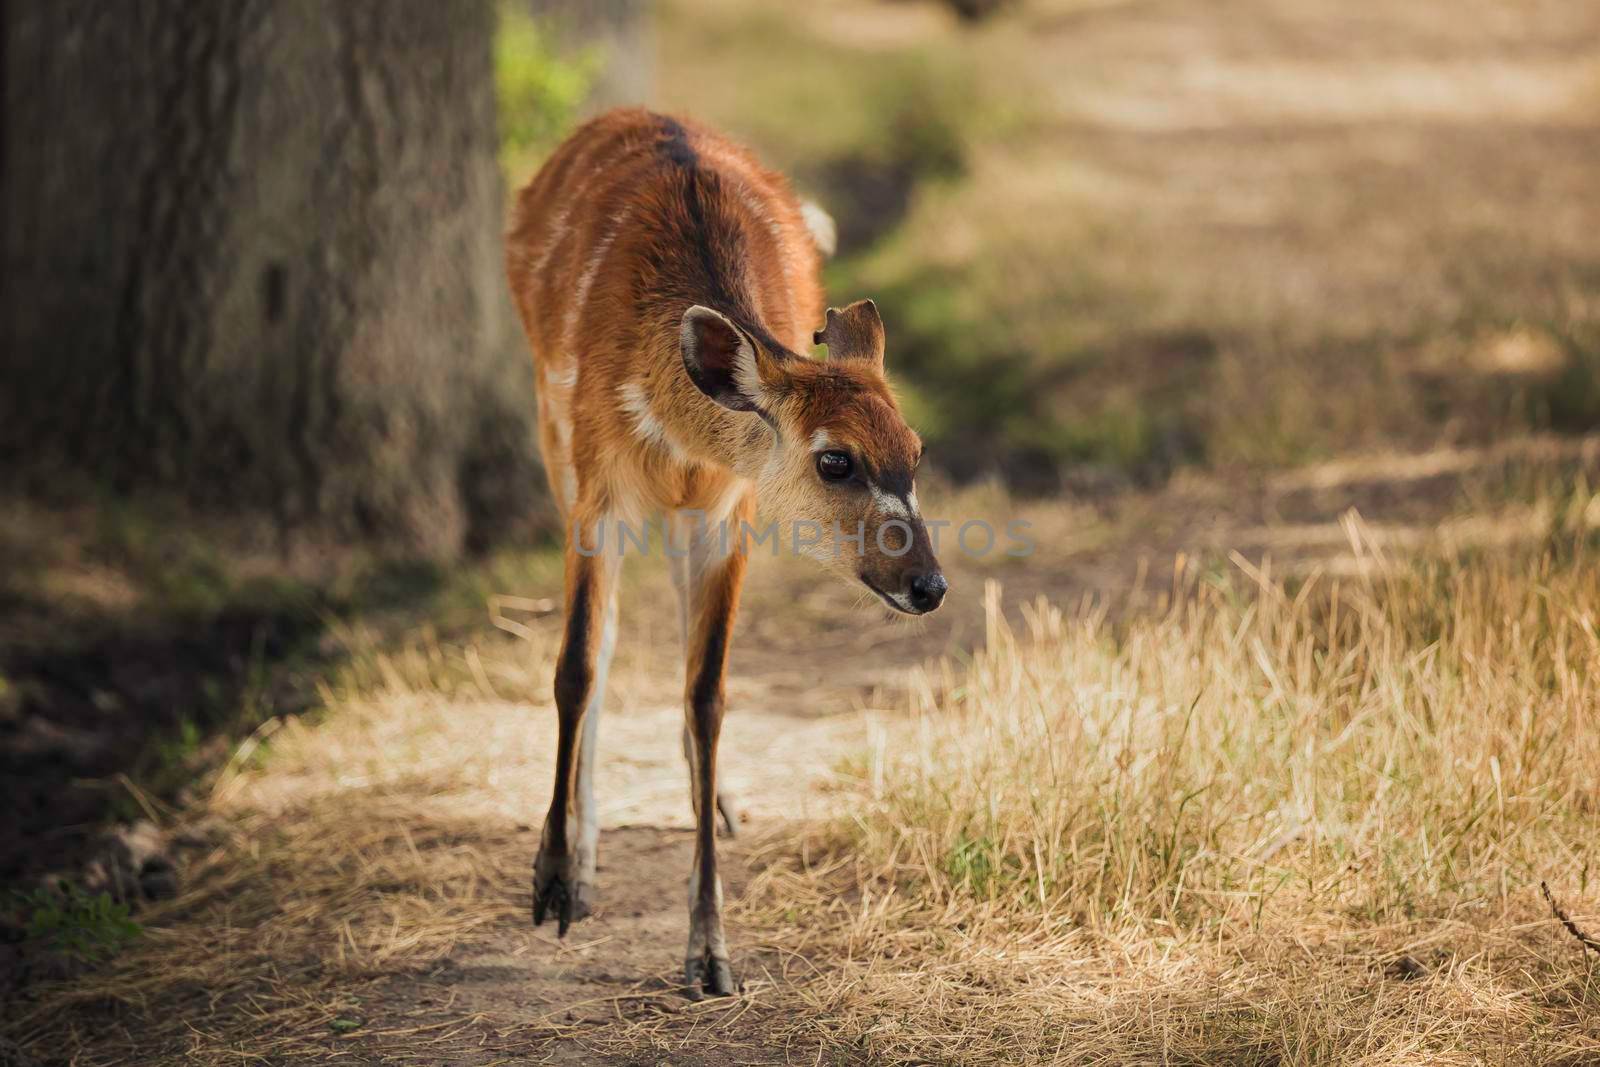 Roe deer walking along the path in the park